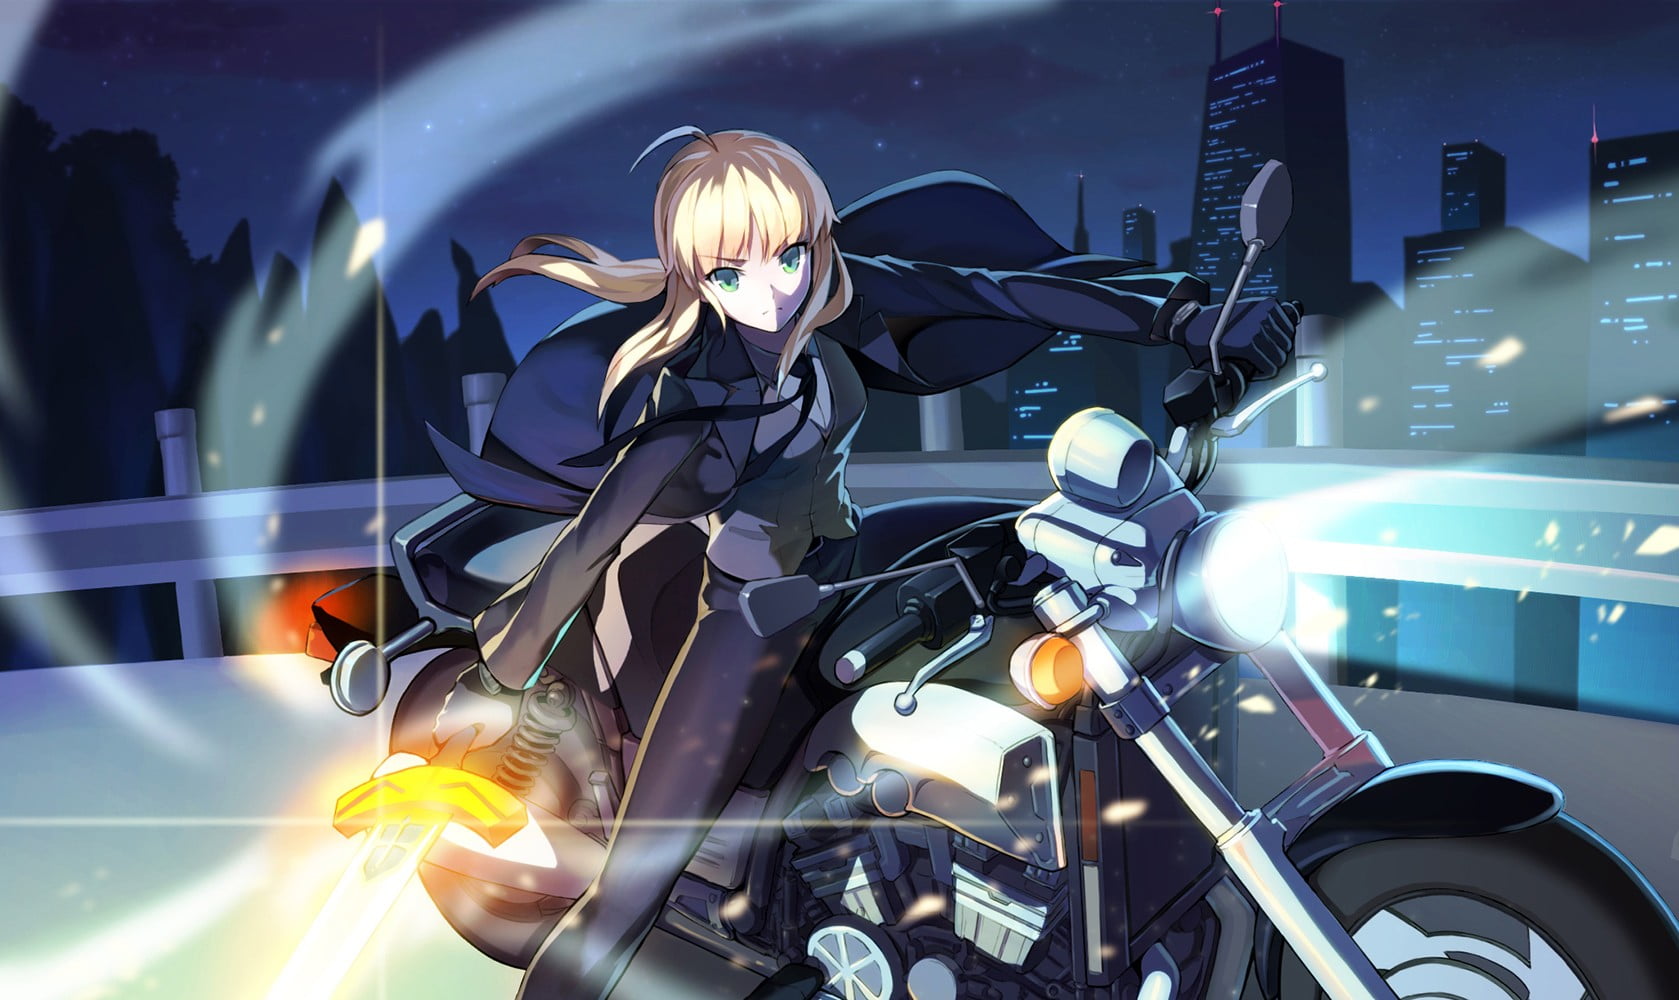 woman riding motorcycle illustration, Fate Series, anime, anime girls